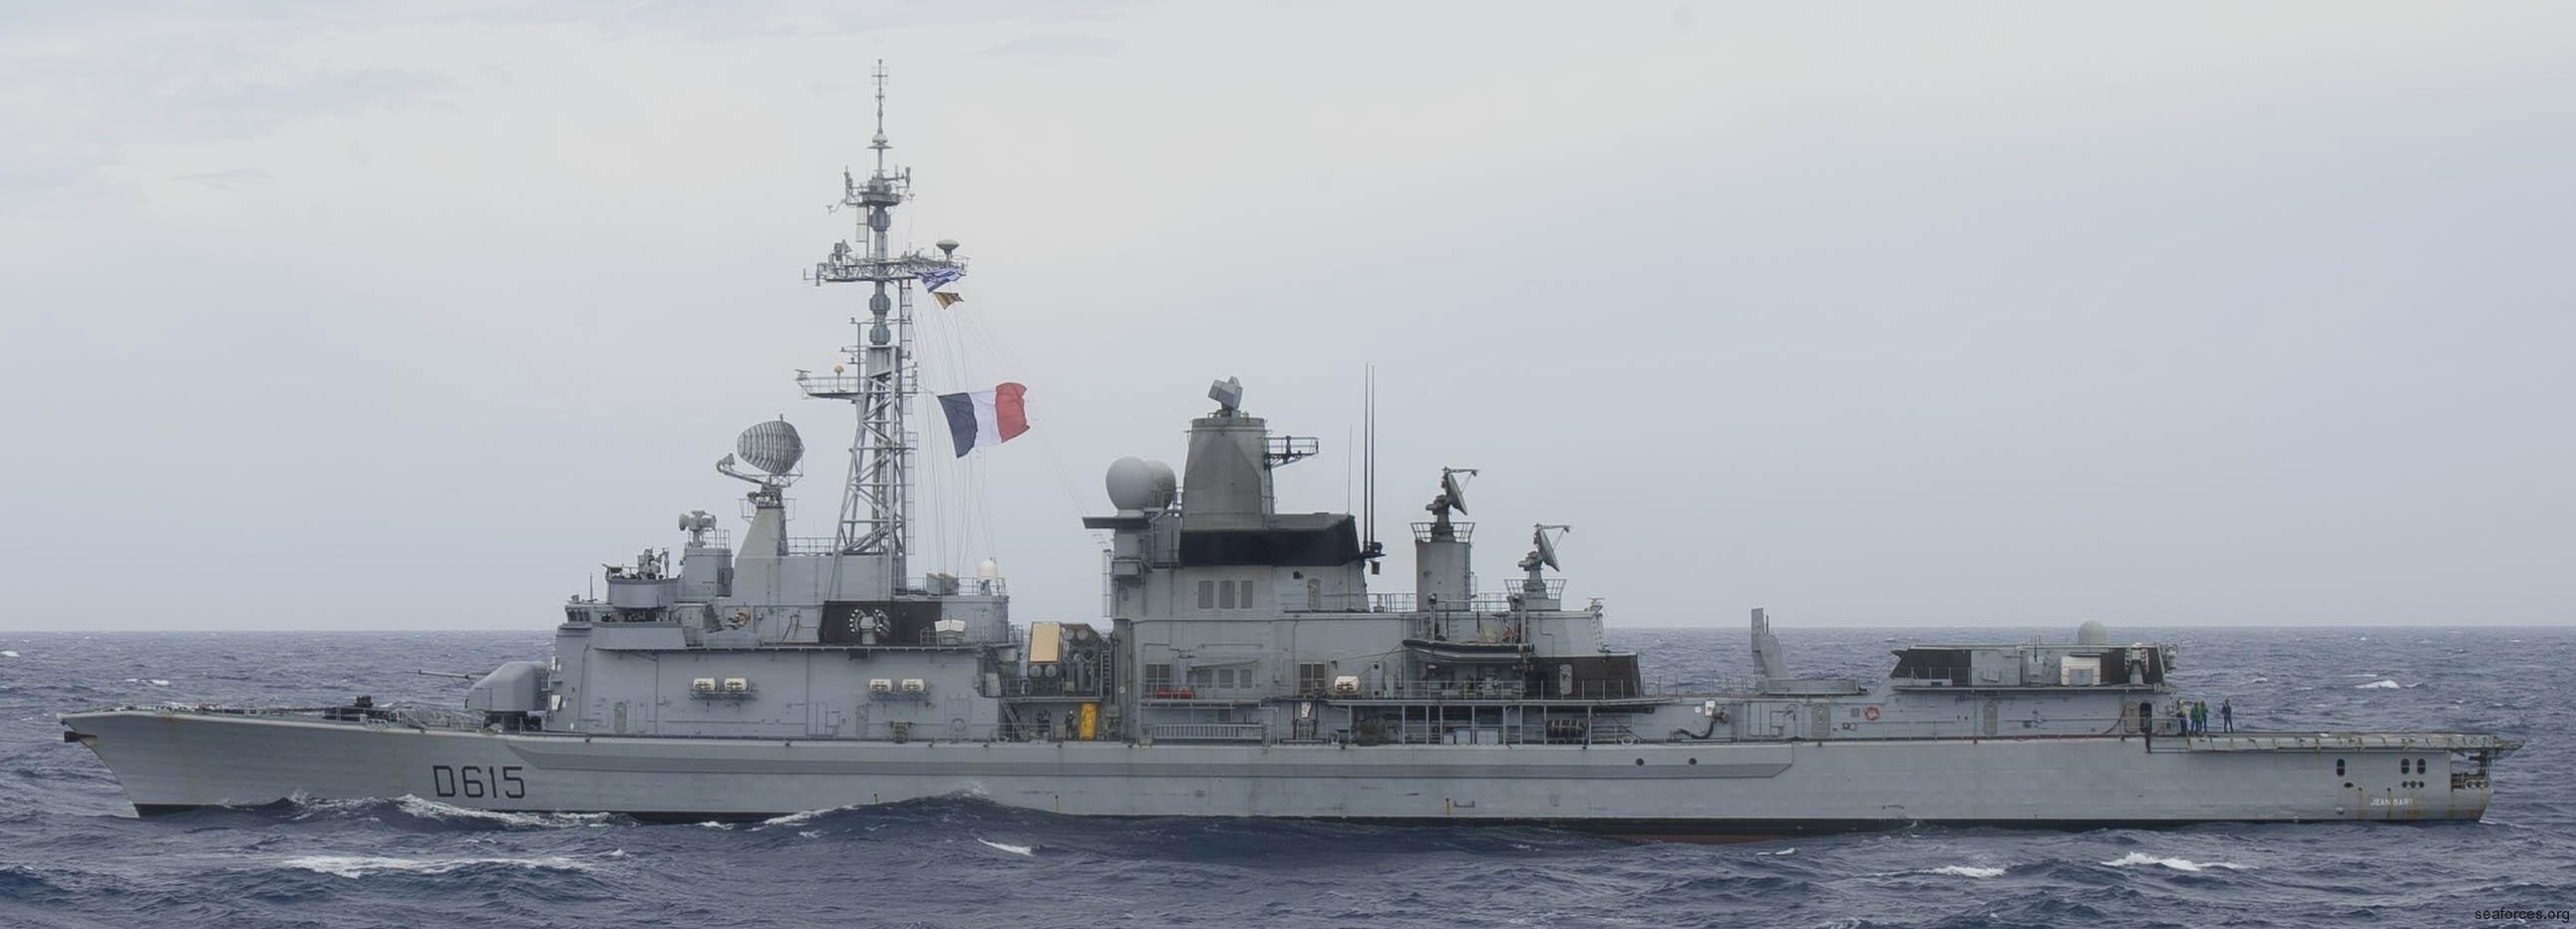 d-615 fs jean bart cassard f70aa class guided missile frigate ffgh ddg french navy marine nationale 26